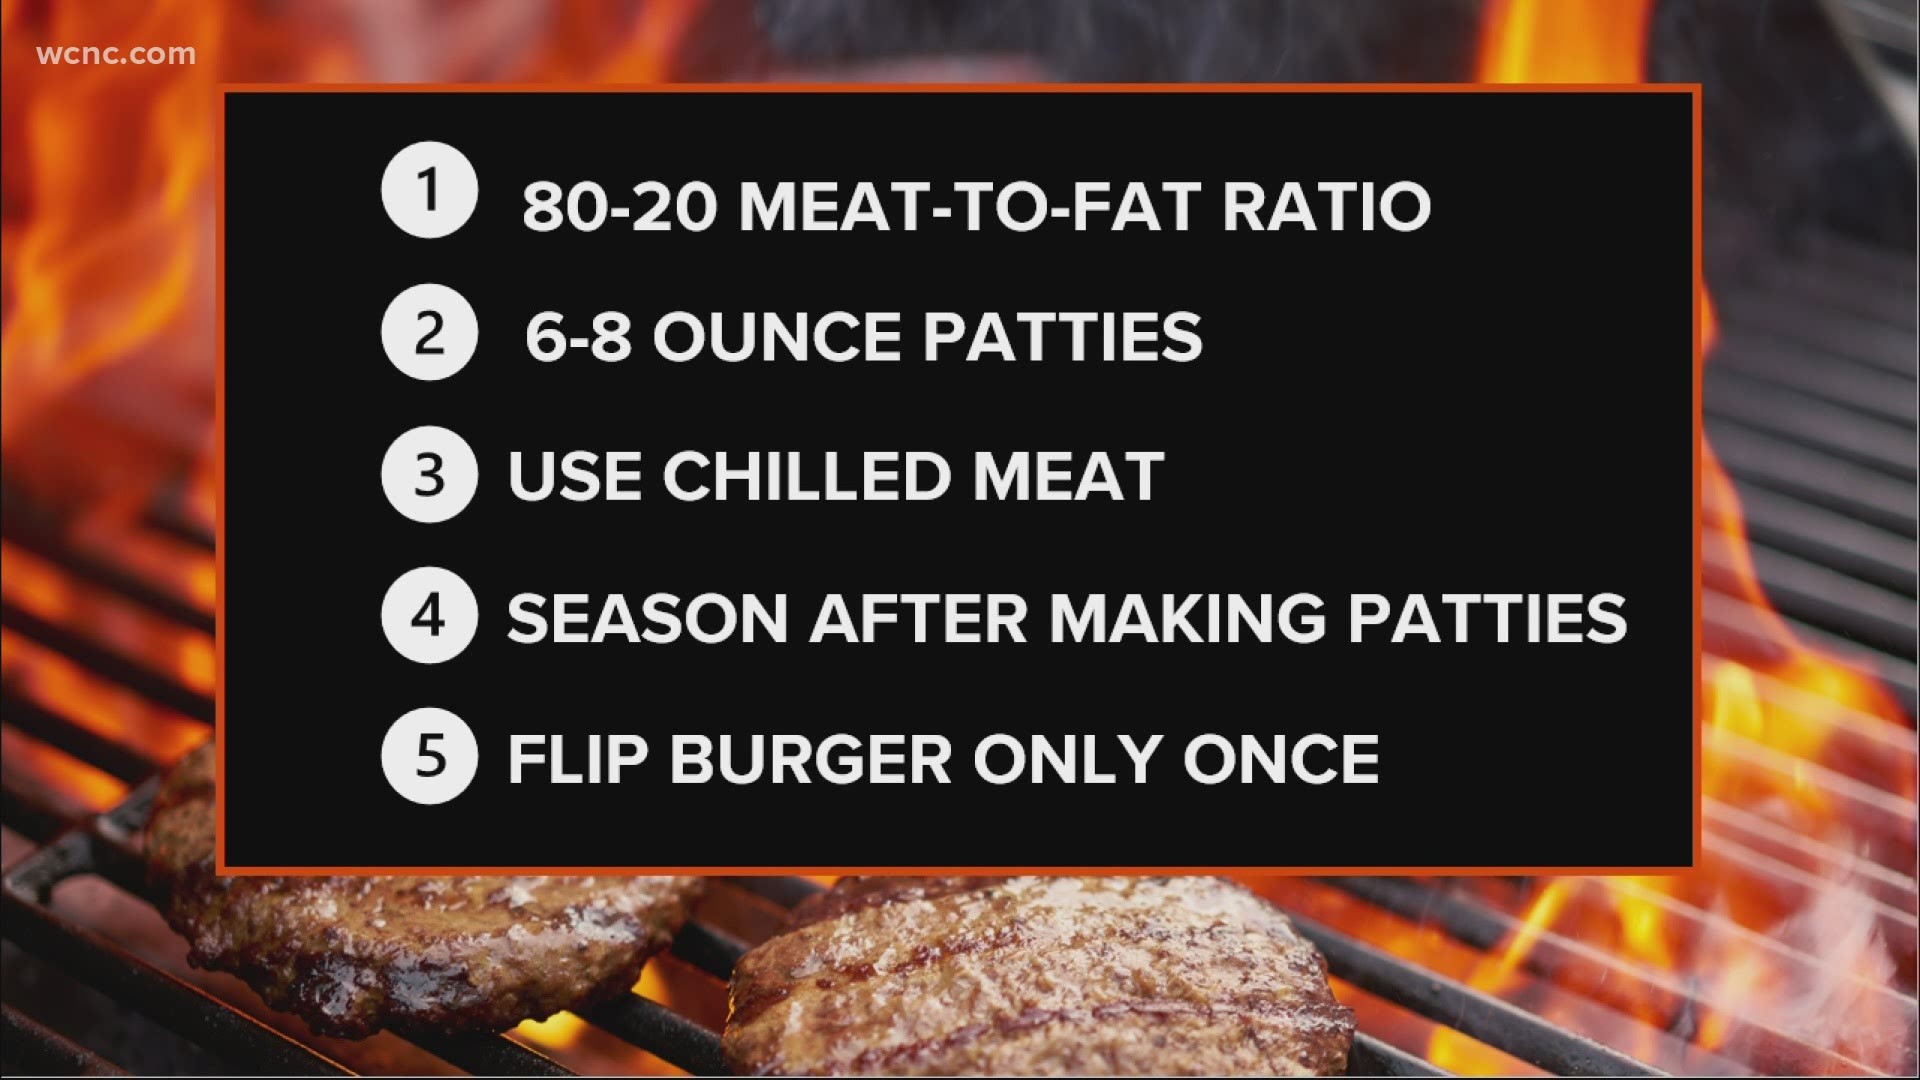 Friday is National Hamburger Day! These tips will help you celebrate by cooking the perfect burger.